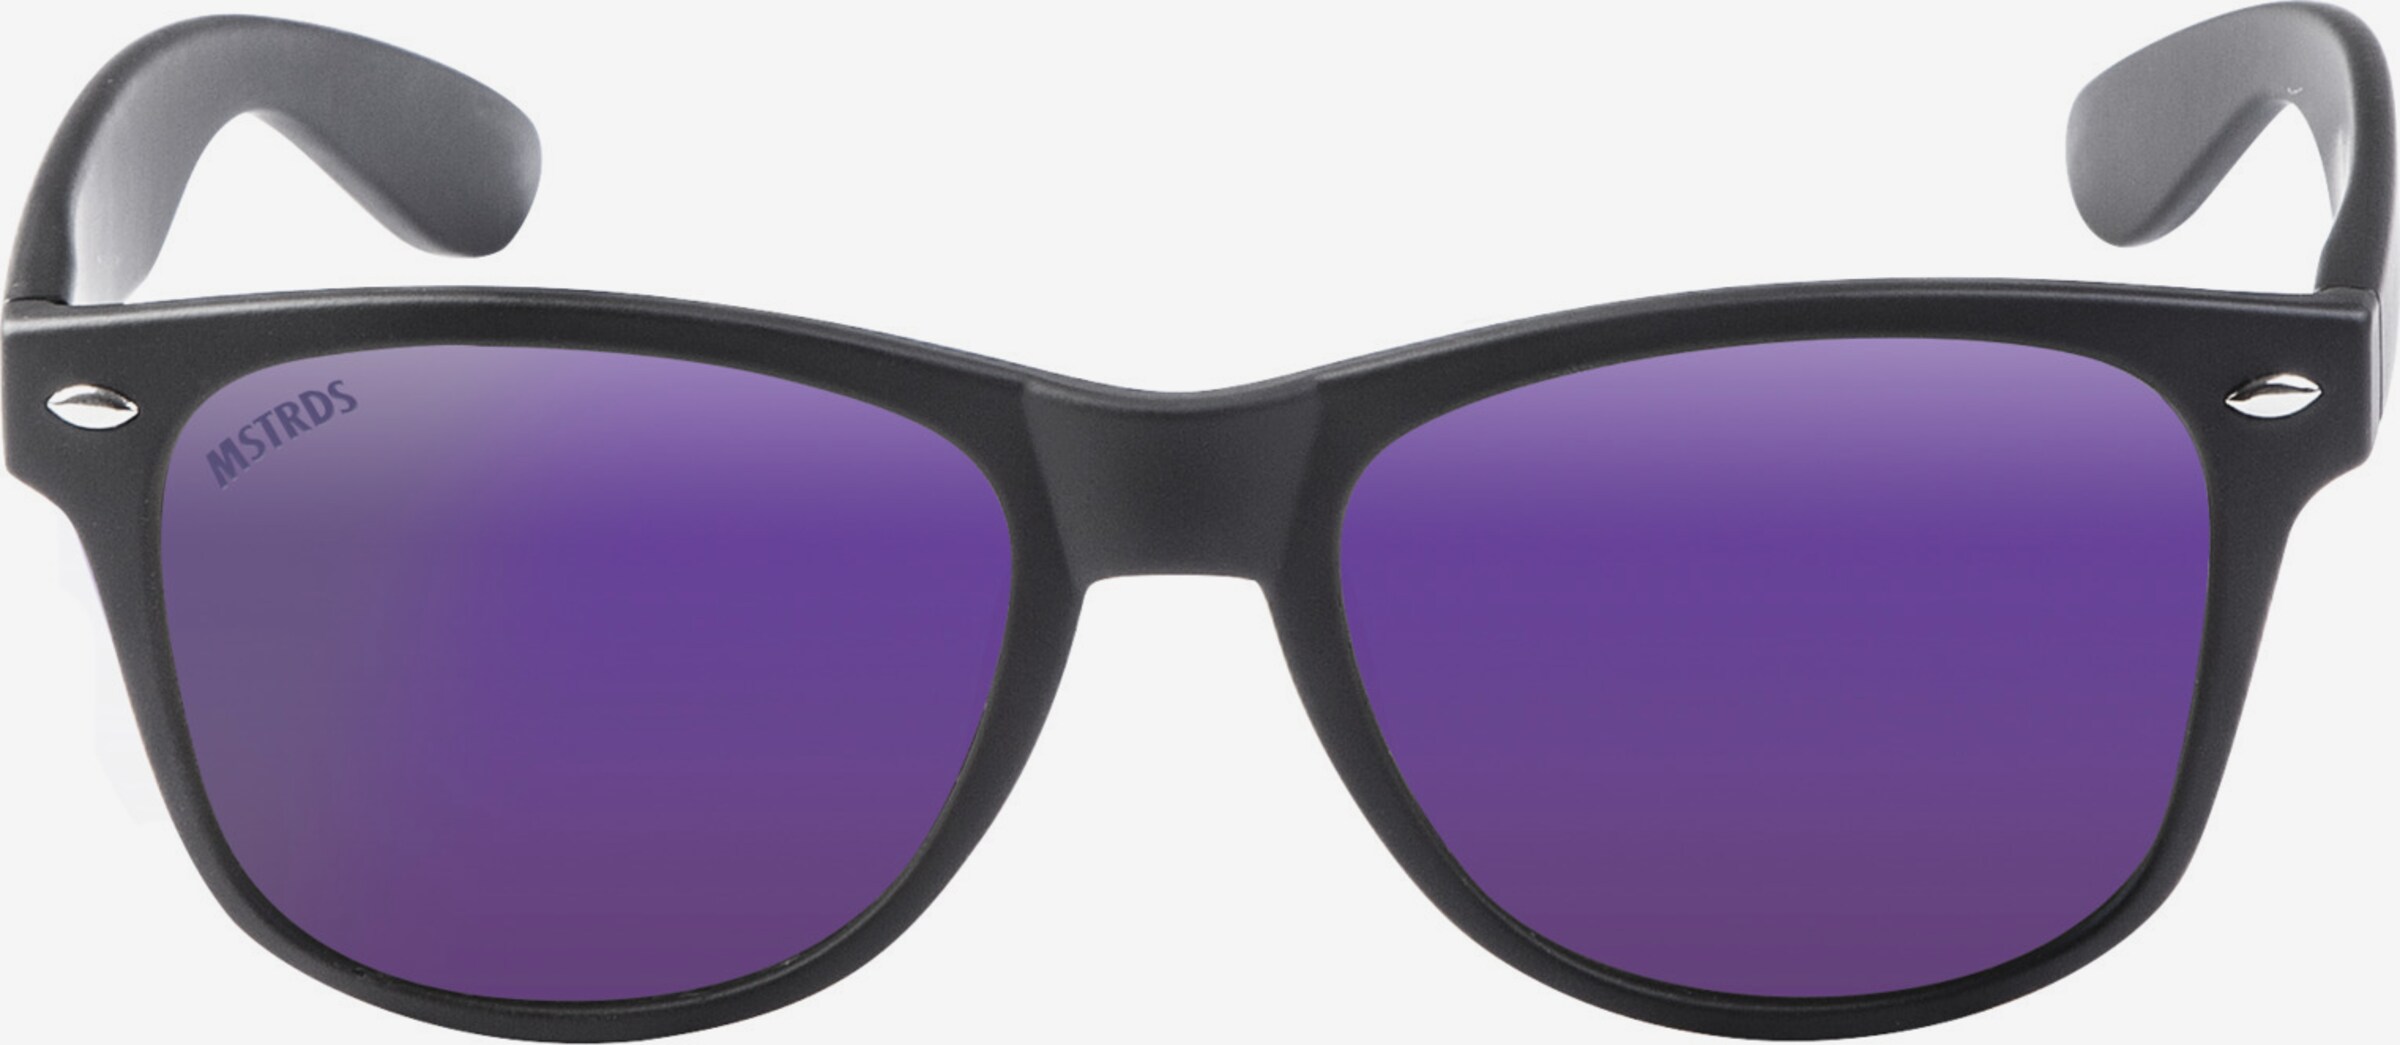 MSTRDS Sonnenbrille 'Likoma' in Schwarz | ABOUT YOU